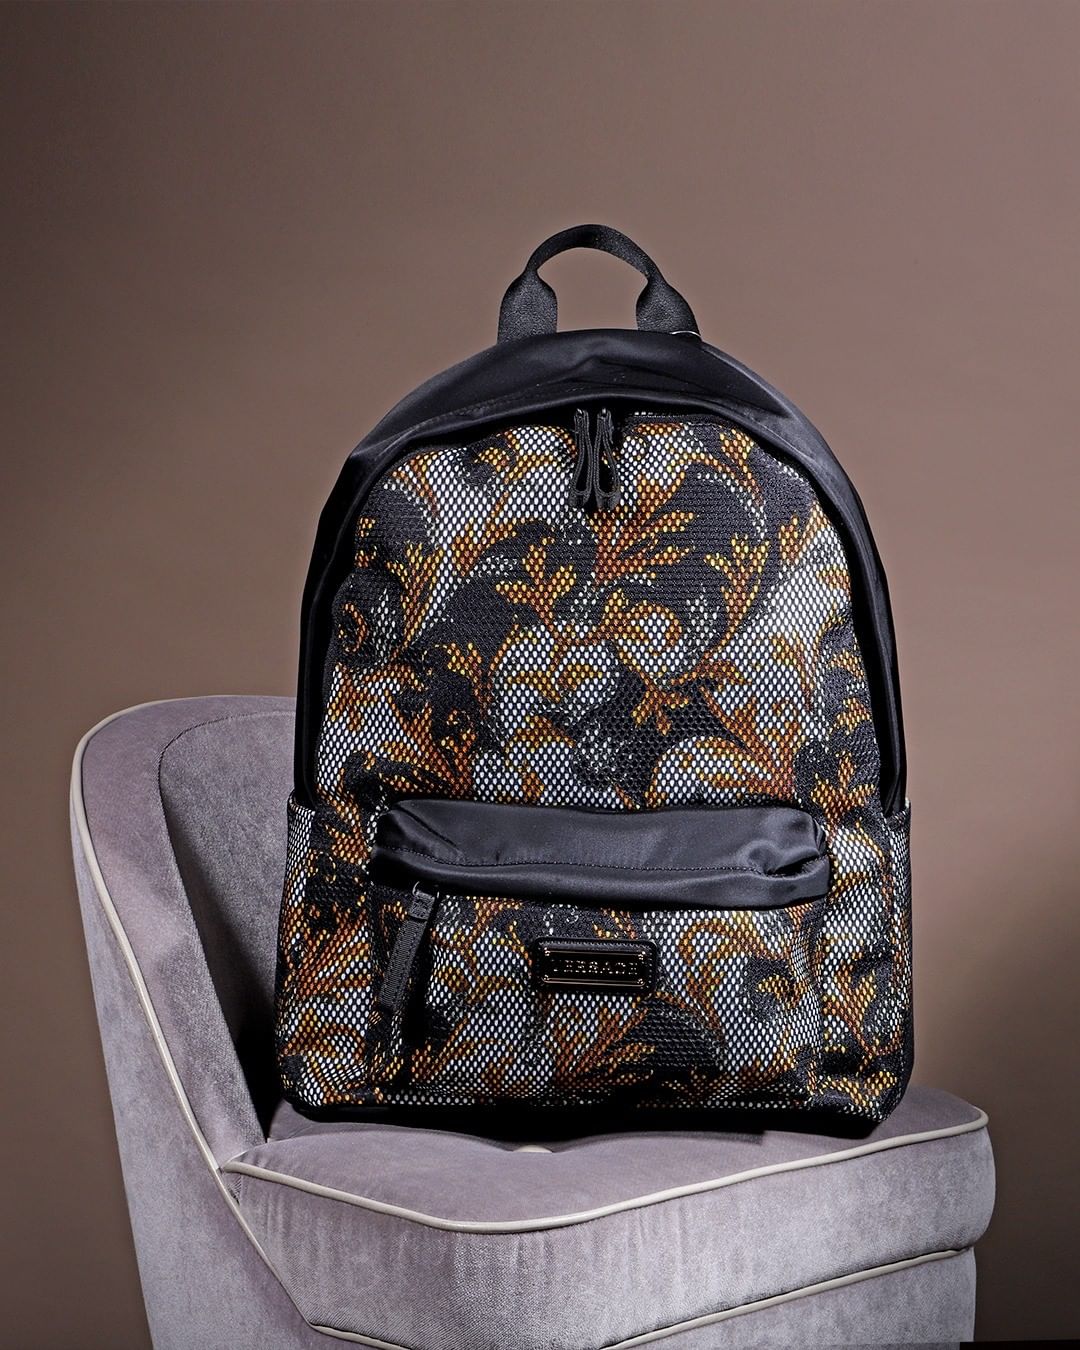 BAMBINIFASHION.COM - Name 3 items that you would put inside this backpack? Get the Versace backpack before it's sold out! 
-
-
-
-

#versacebackpack #bambinifashion #backtoschooloutfit #backtoschool #...